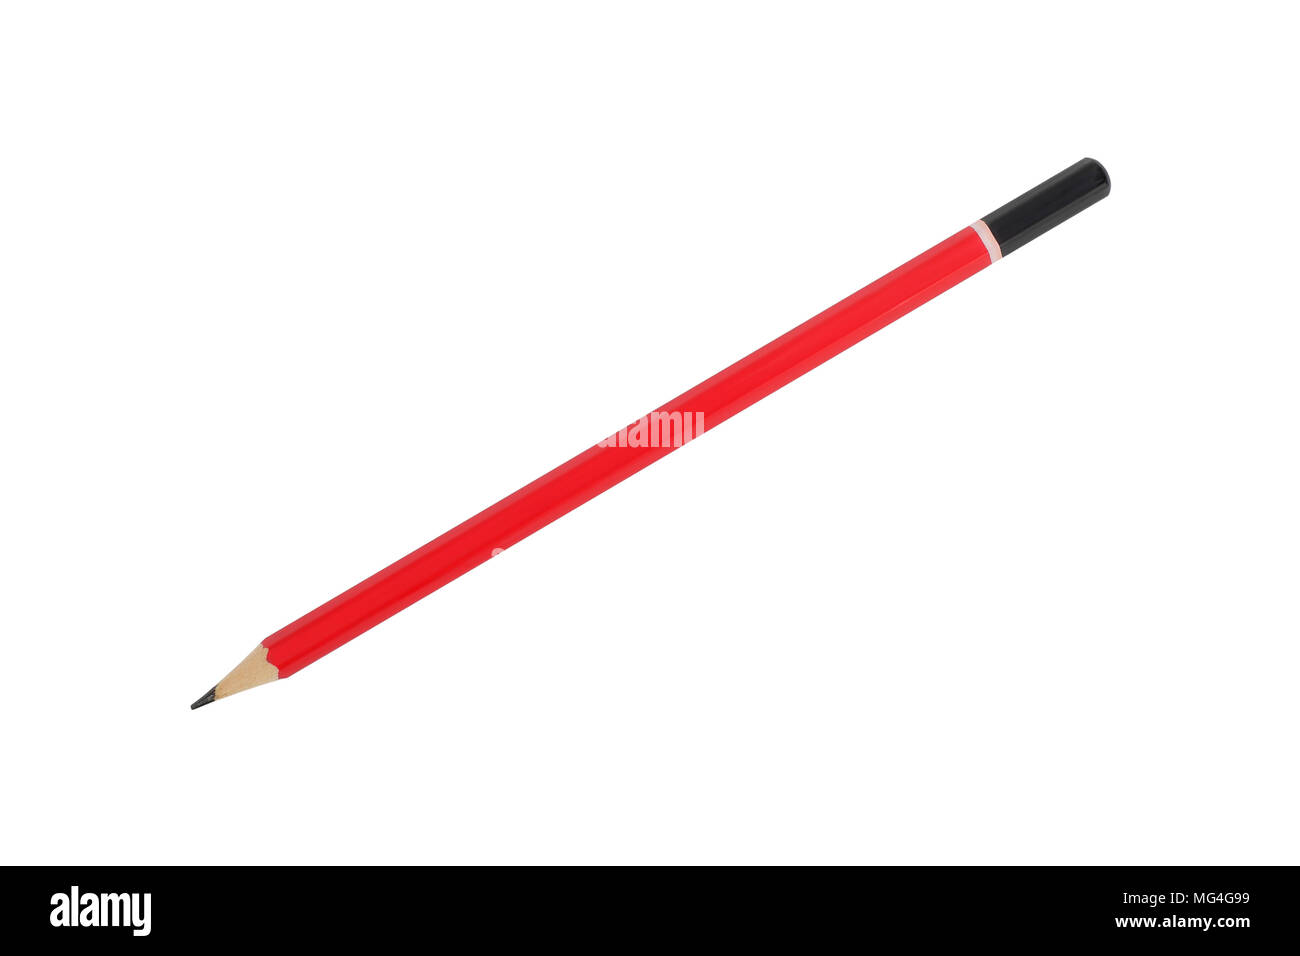 Stationery - New Graphite pencil on a white background. It is isolated, the worker of paths is present. Stock Photo